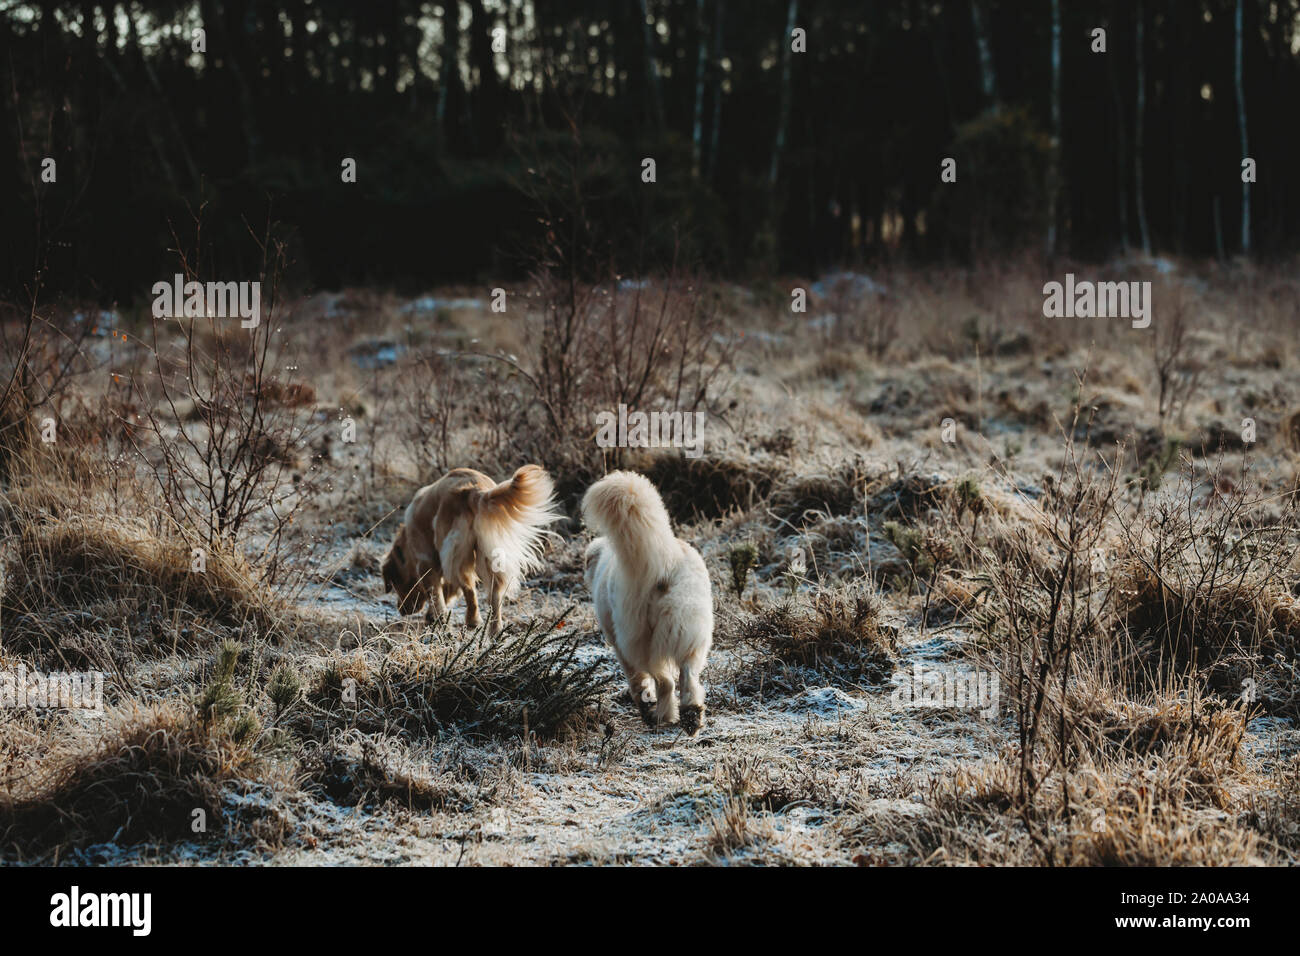 Rear view of two dogs walking through heathland Stock Photo